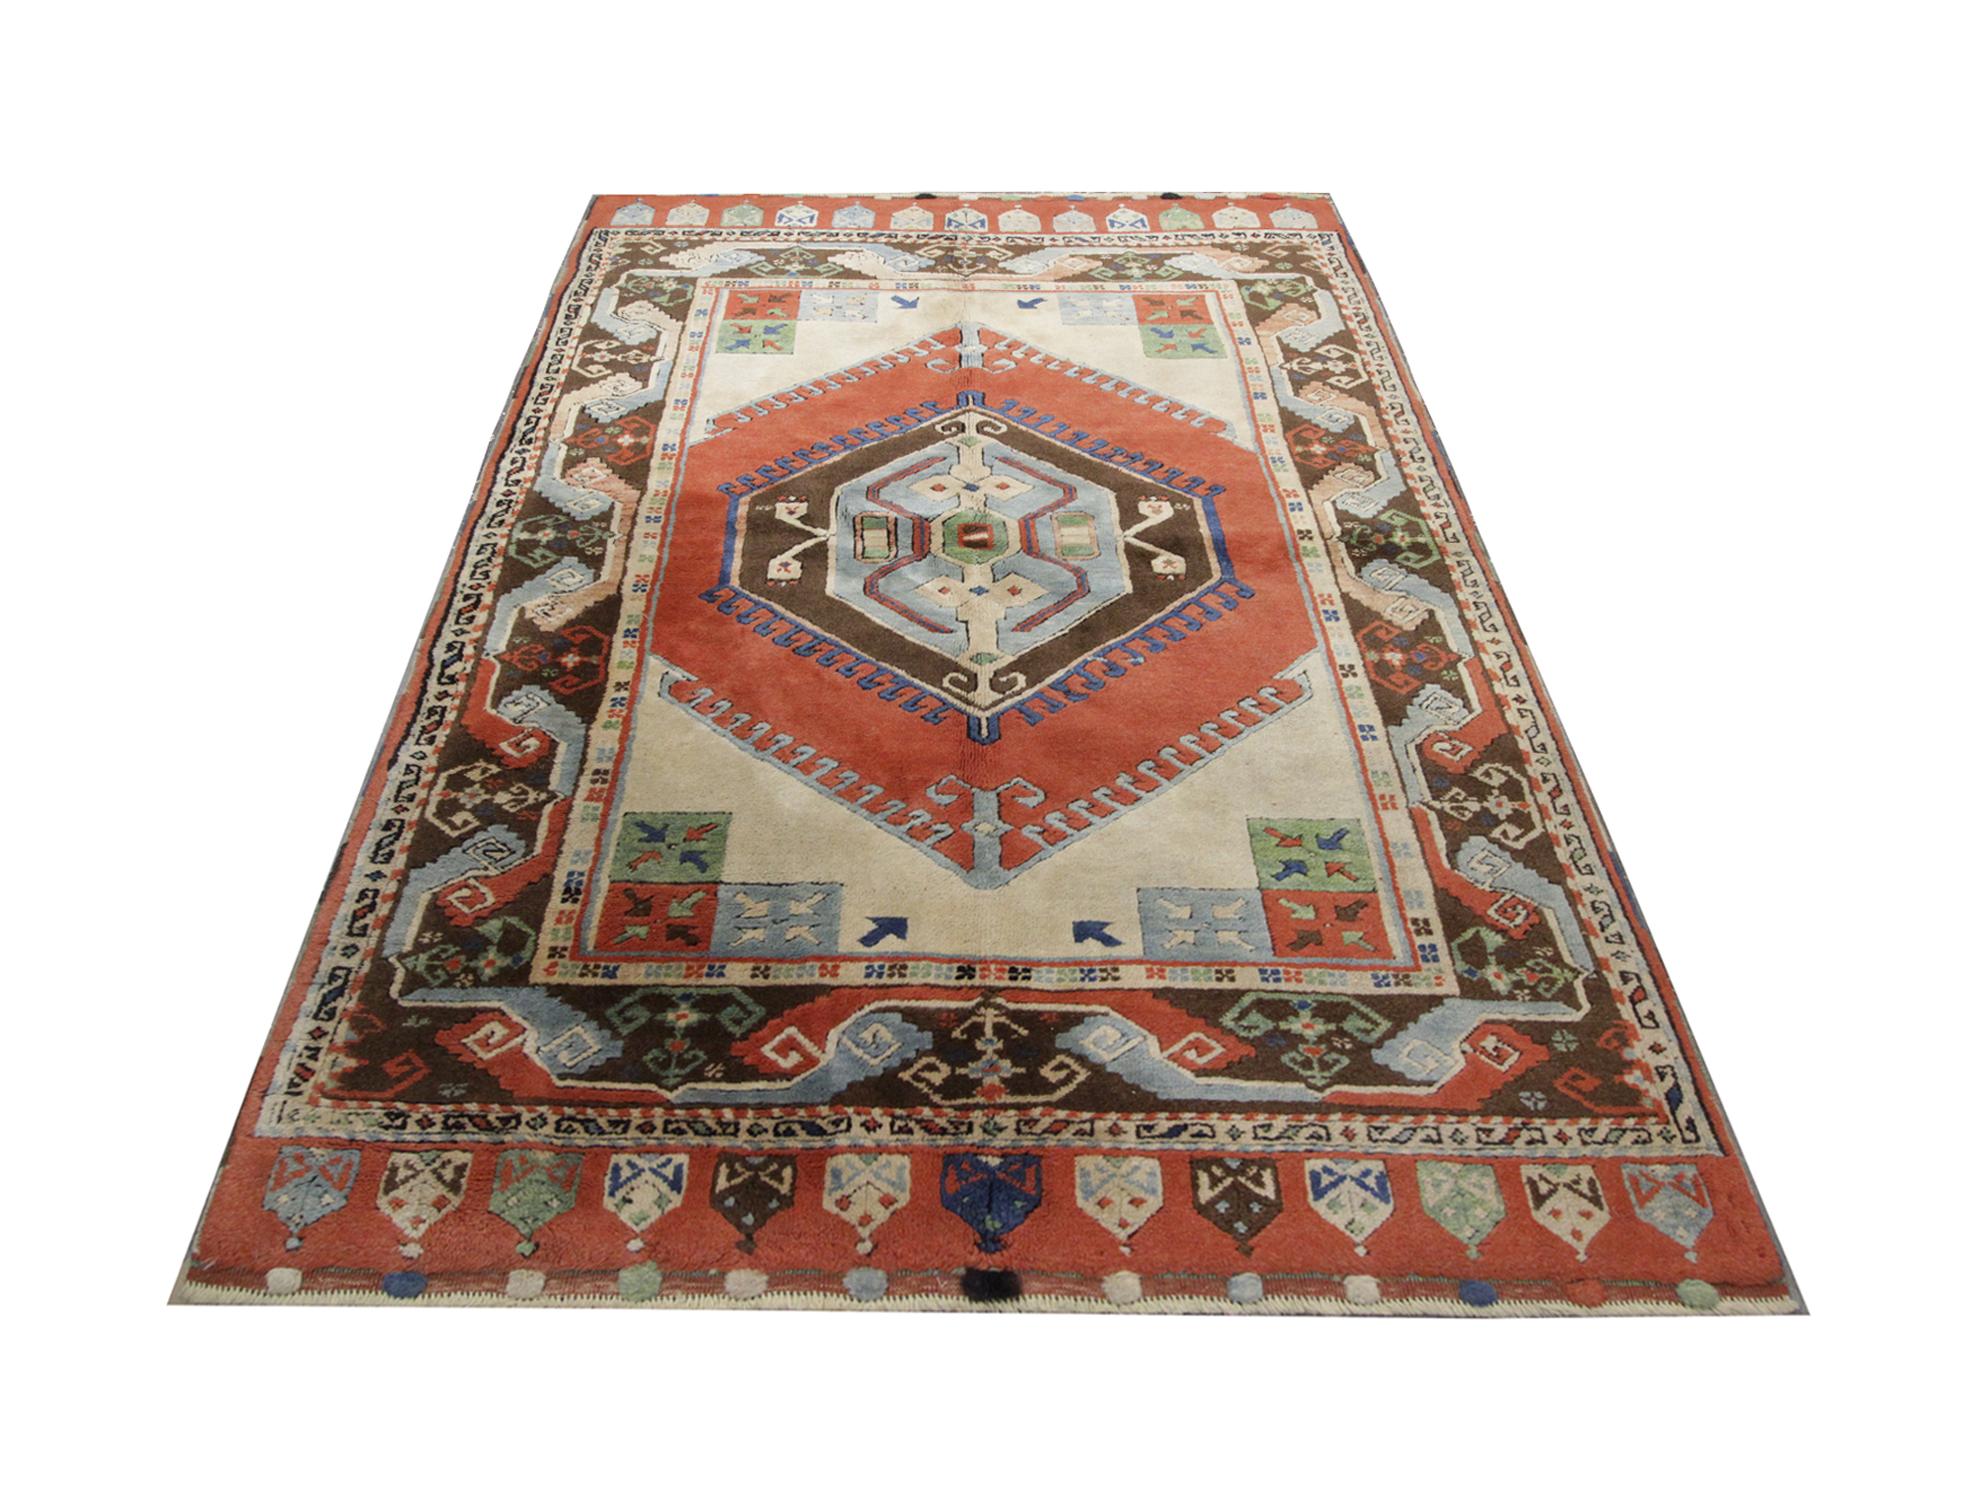 This antique Turkish rug from the Milas area handwoven with tribal and geometric symbols in circa 1930. The design features a large multicoloured motif as the central medallion on a burnt orange diamond shape background. The captivating border has